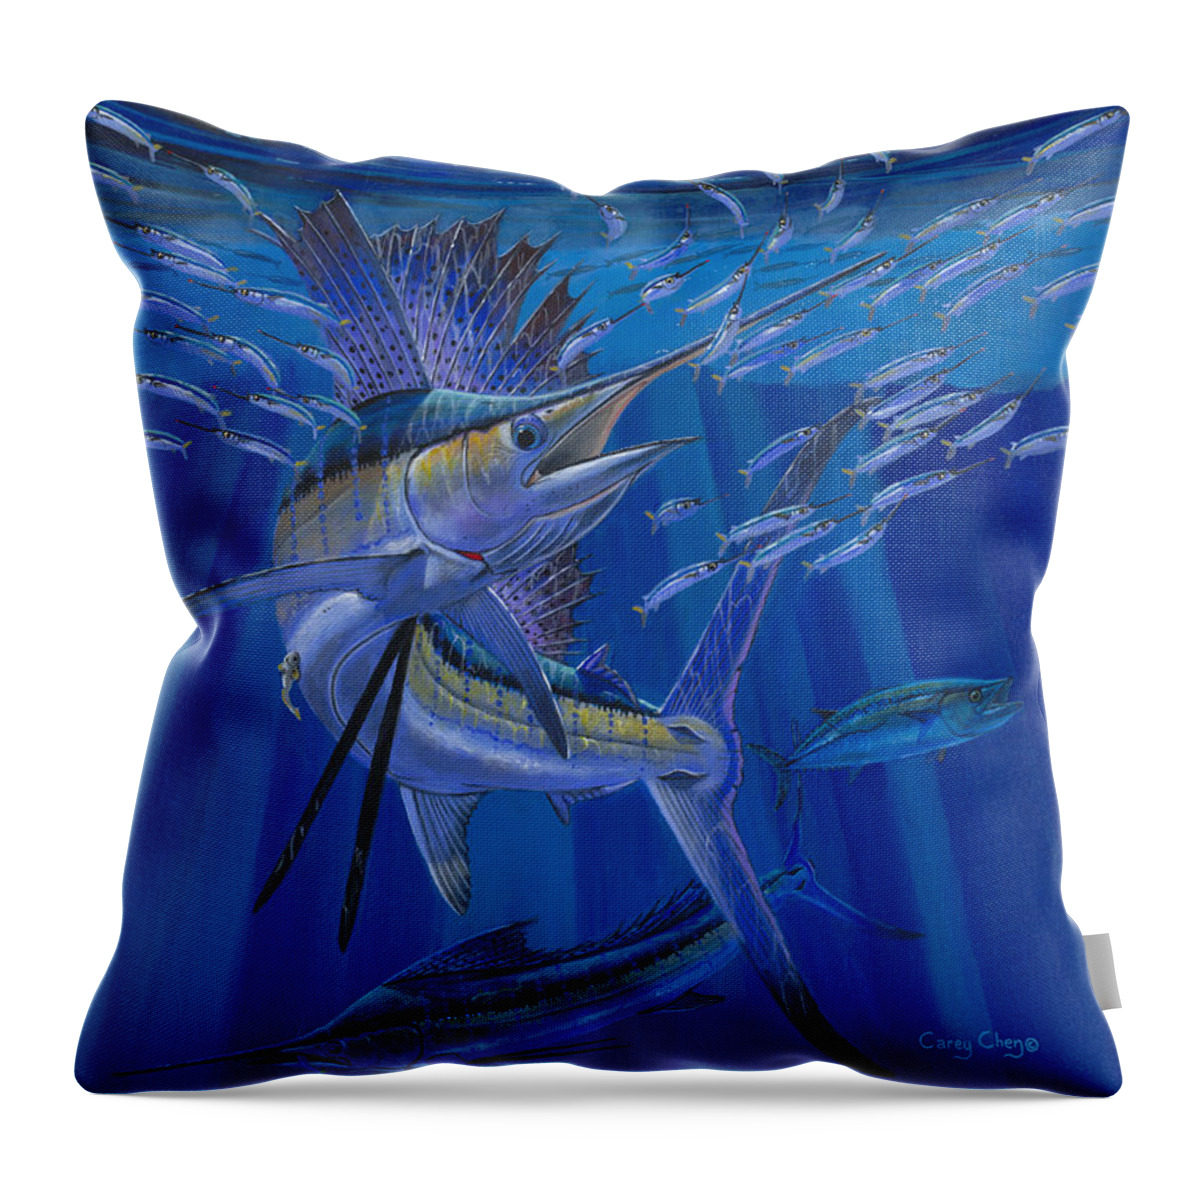 Sailfish Throw Pillow featuring the painting Team Work Off0036 by Carey Chen